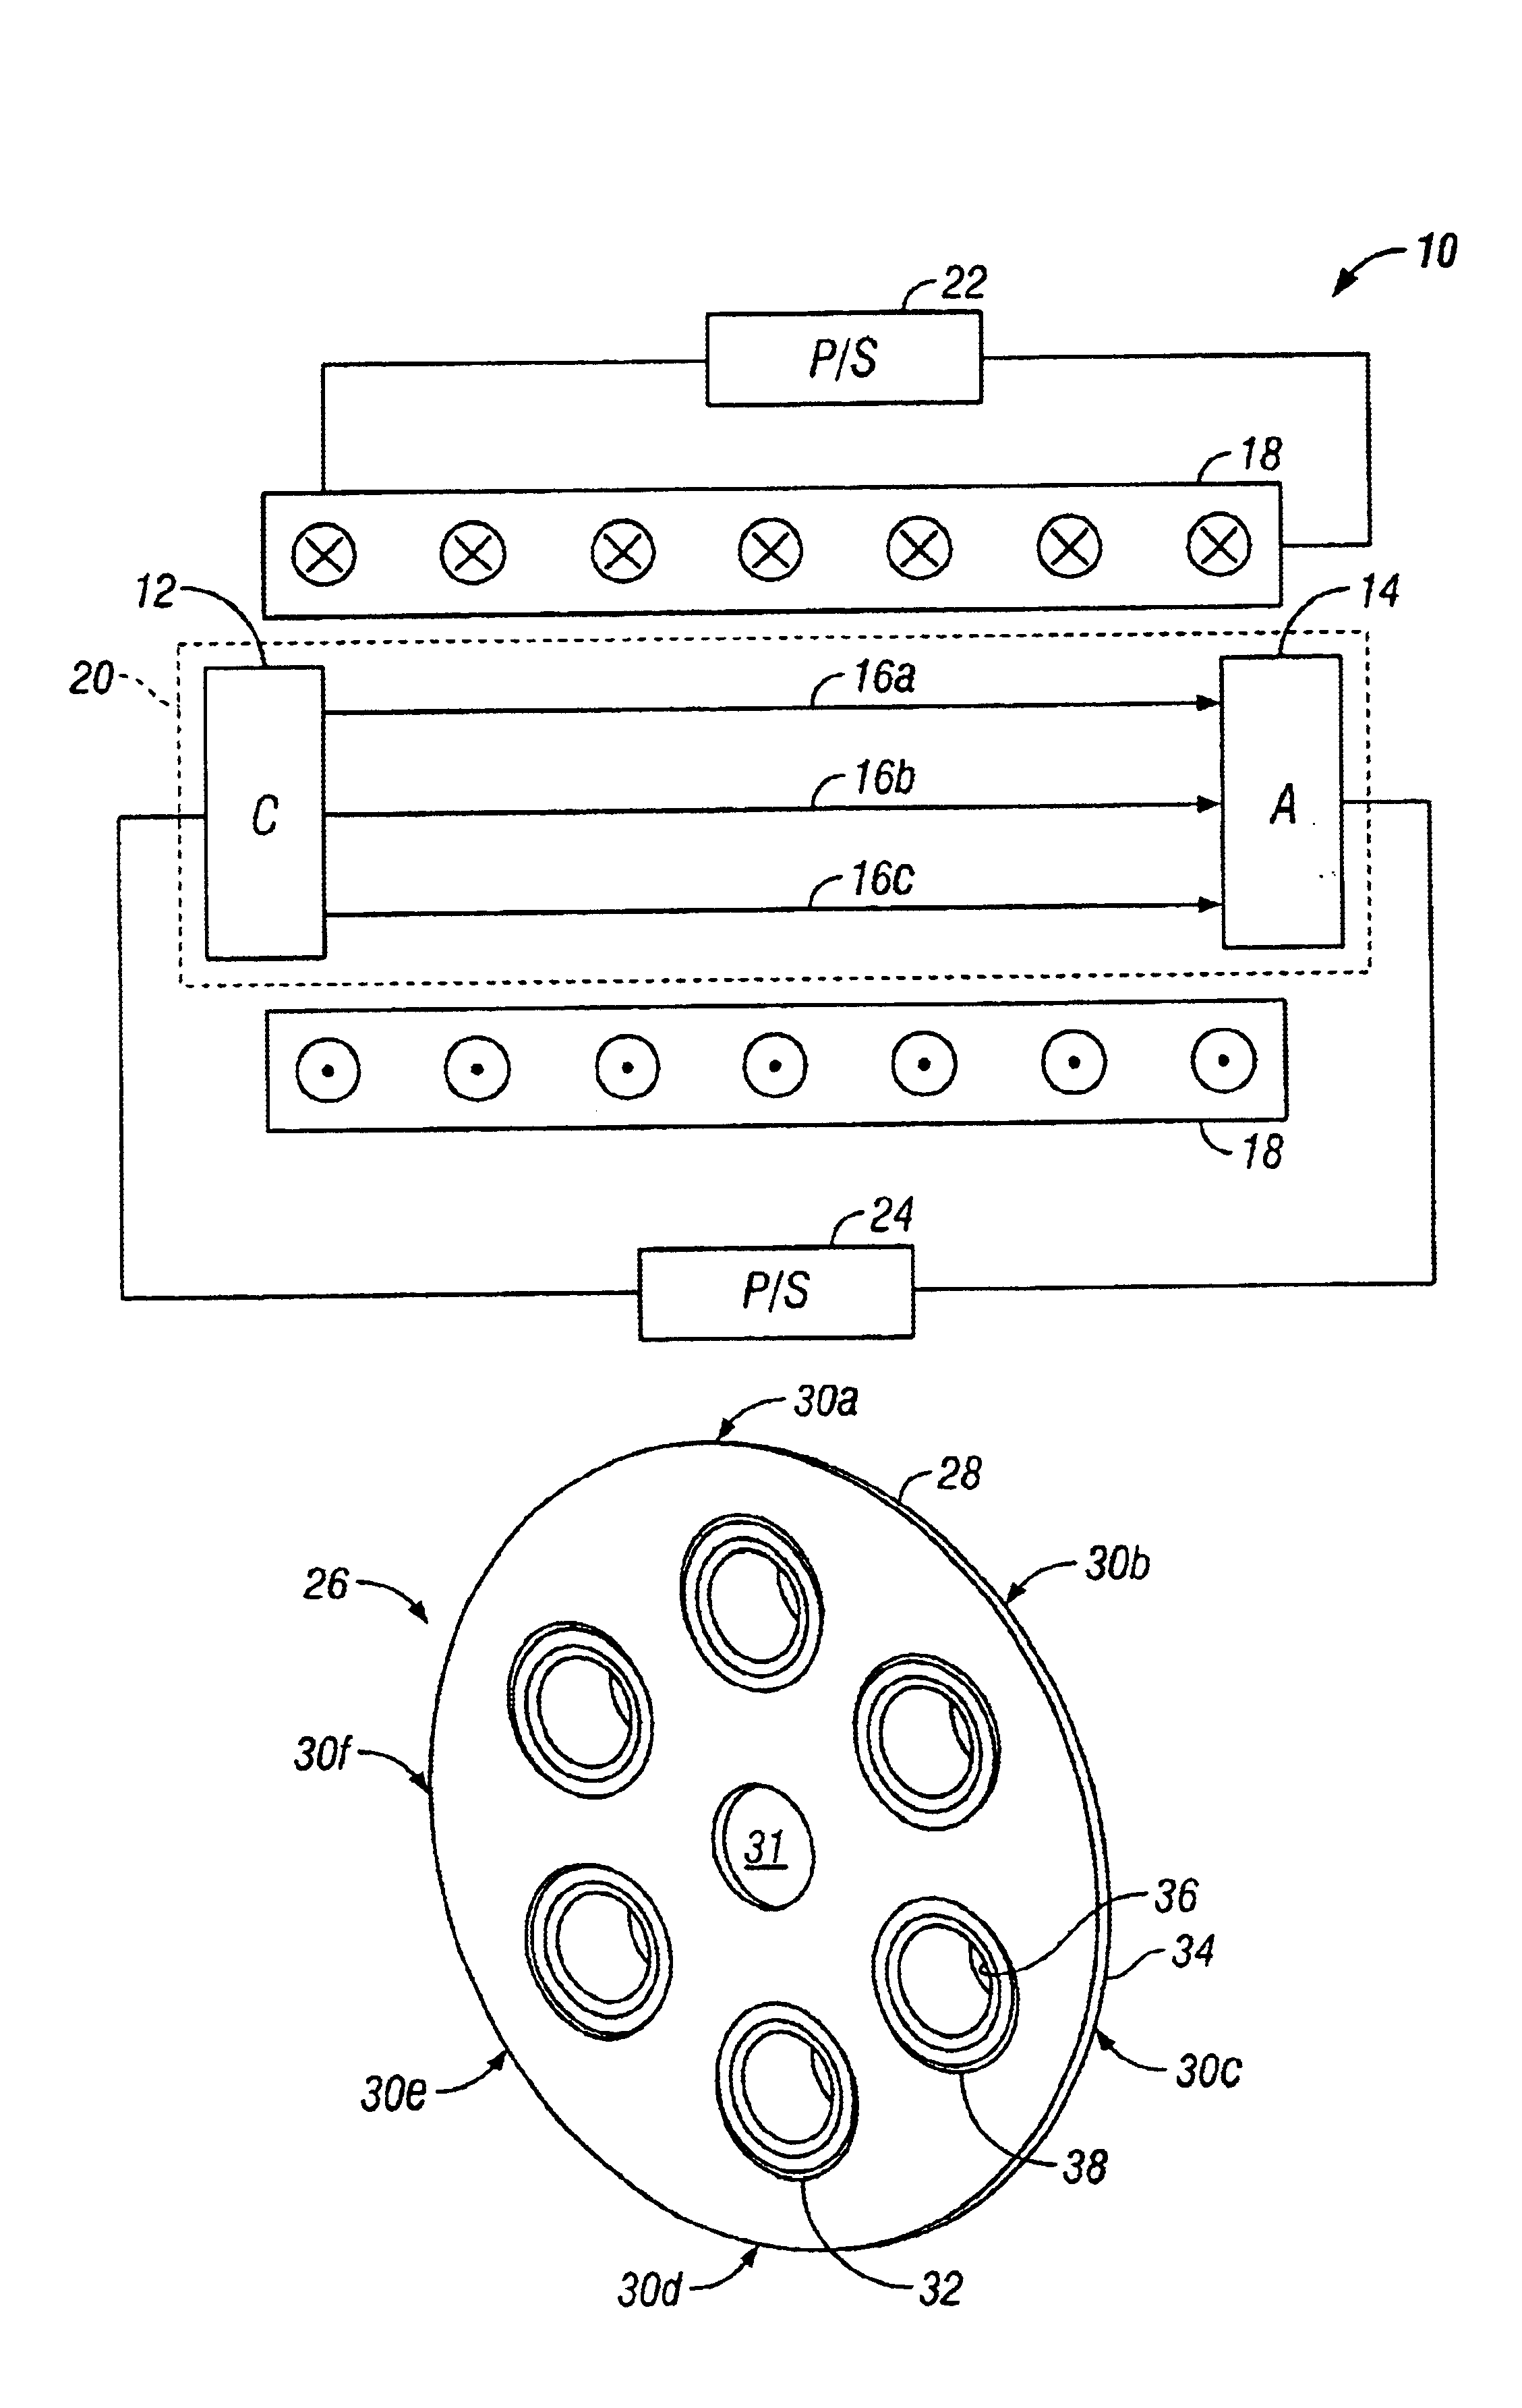 Method and apparatus for magnetic focusing of off-axis electron beam